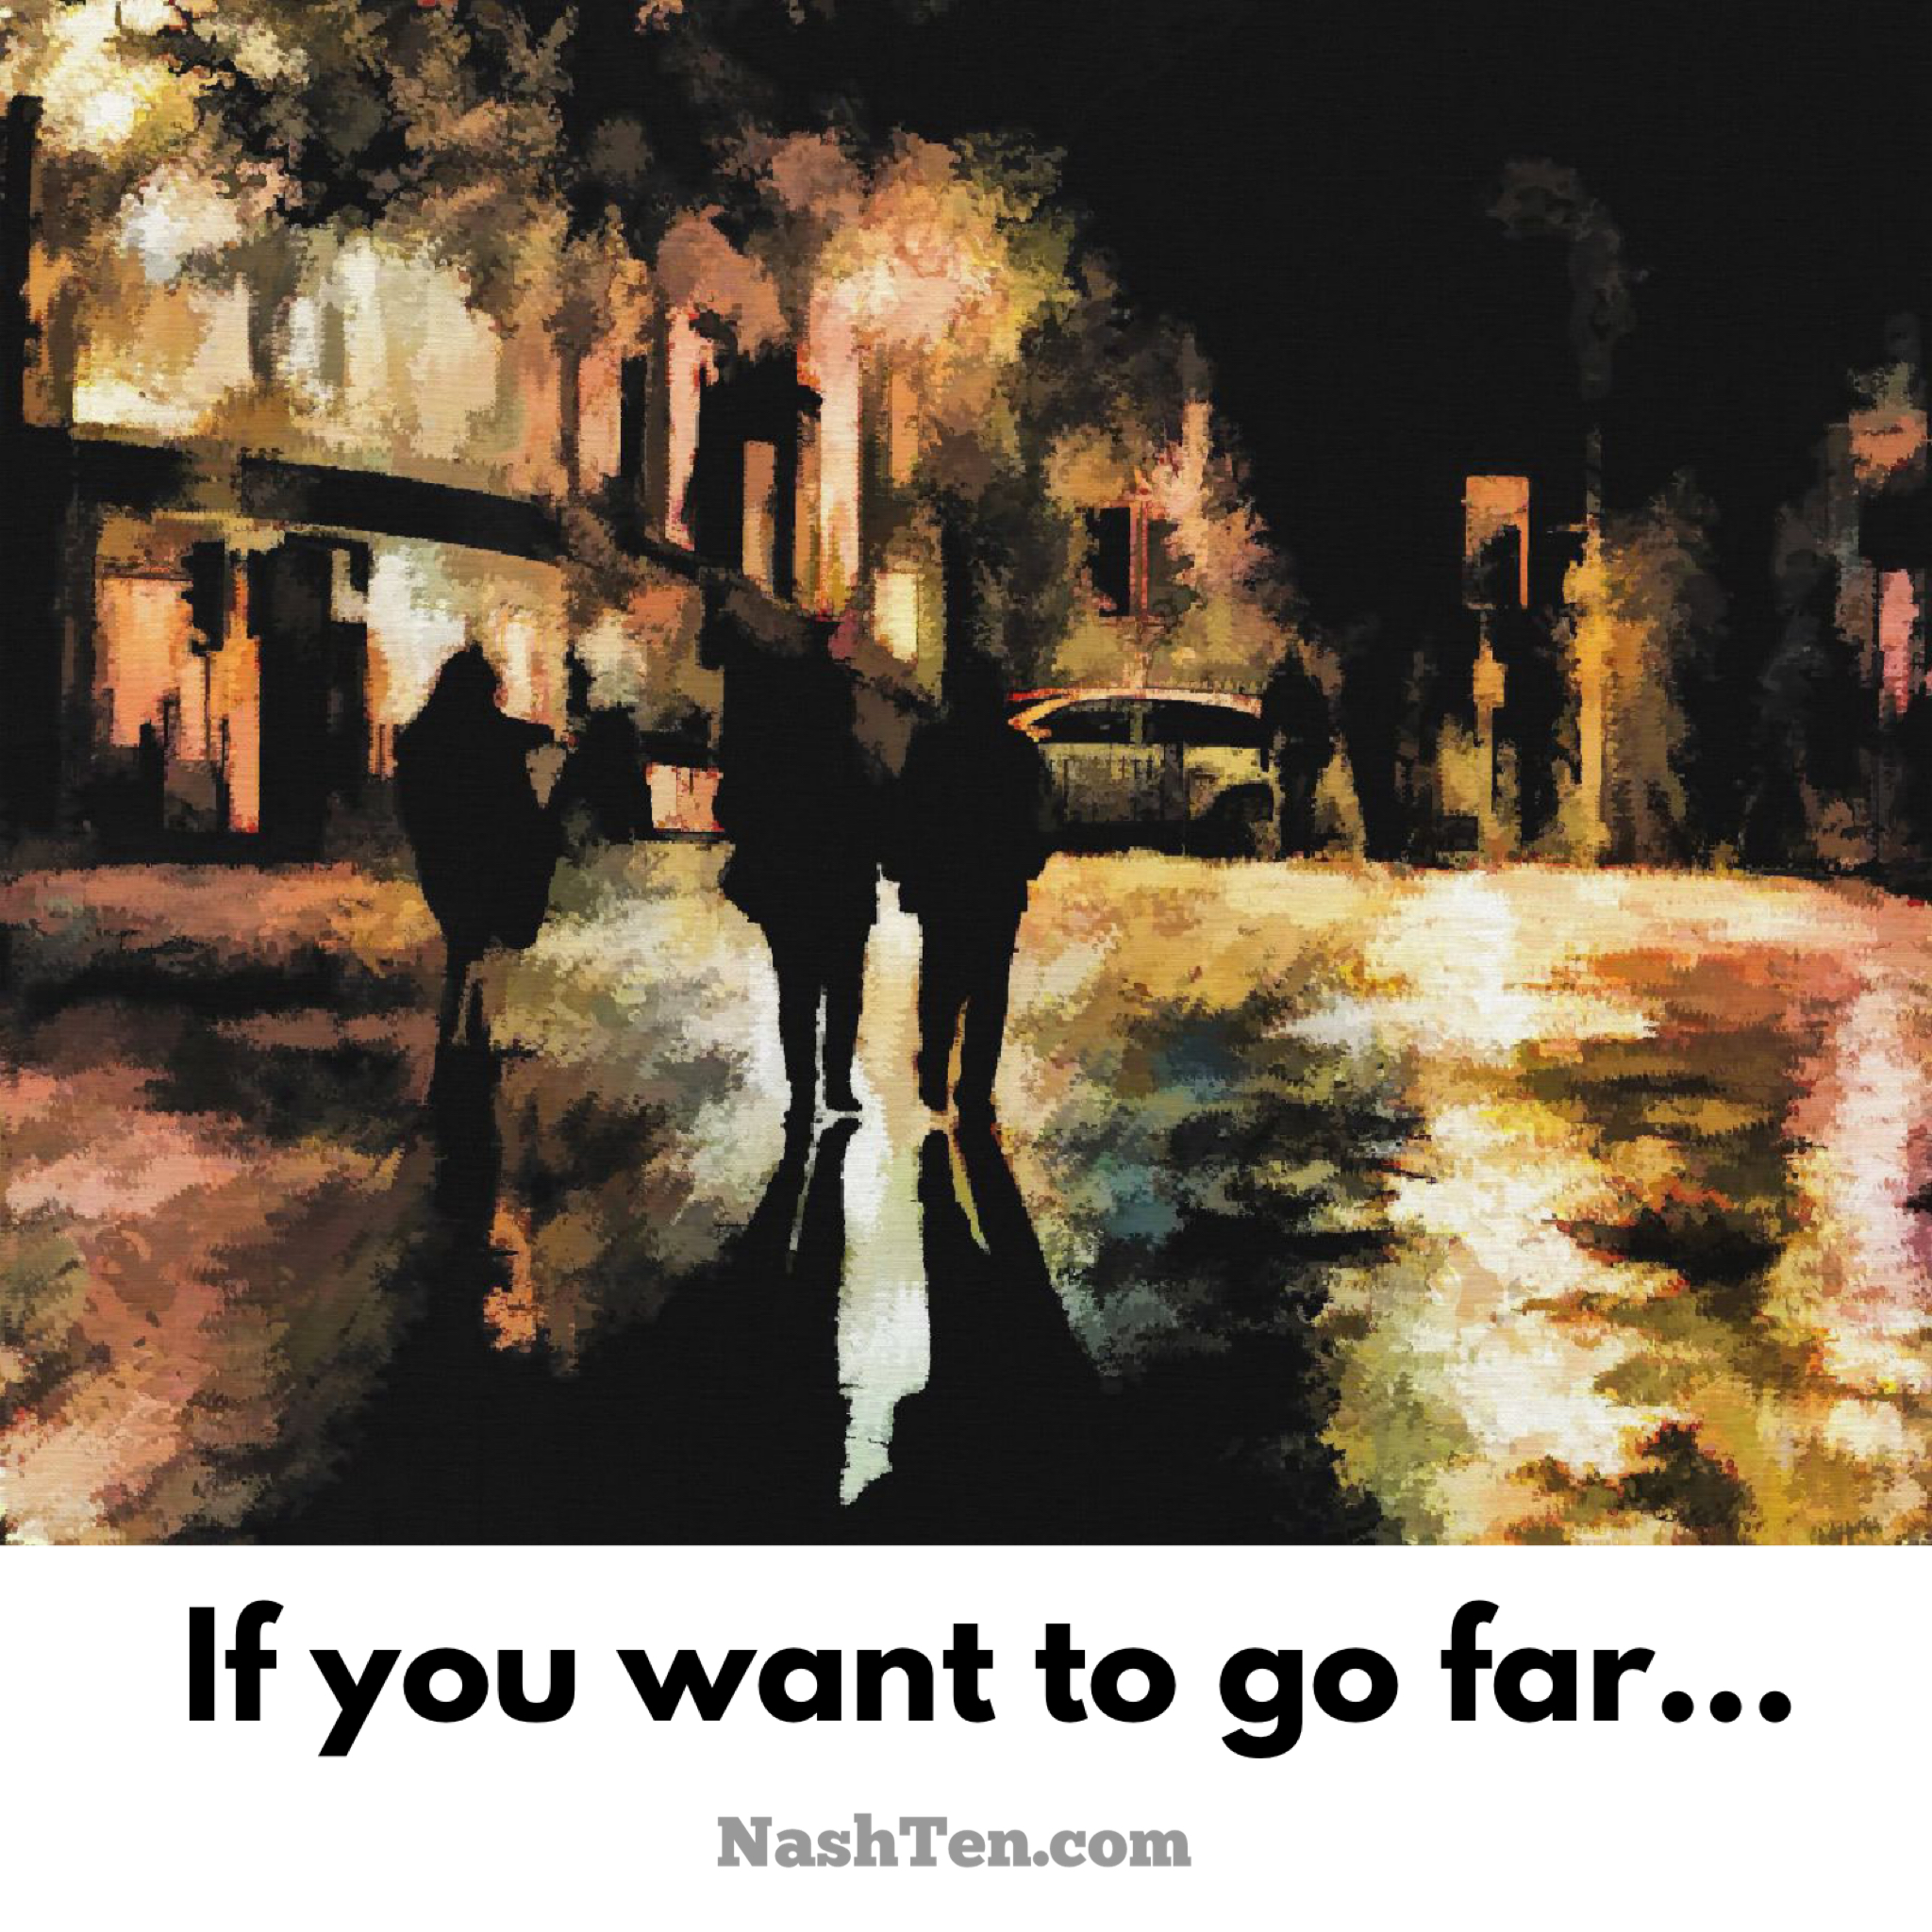 If you want to go far